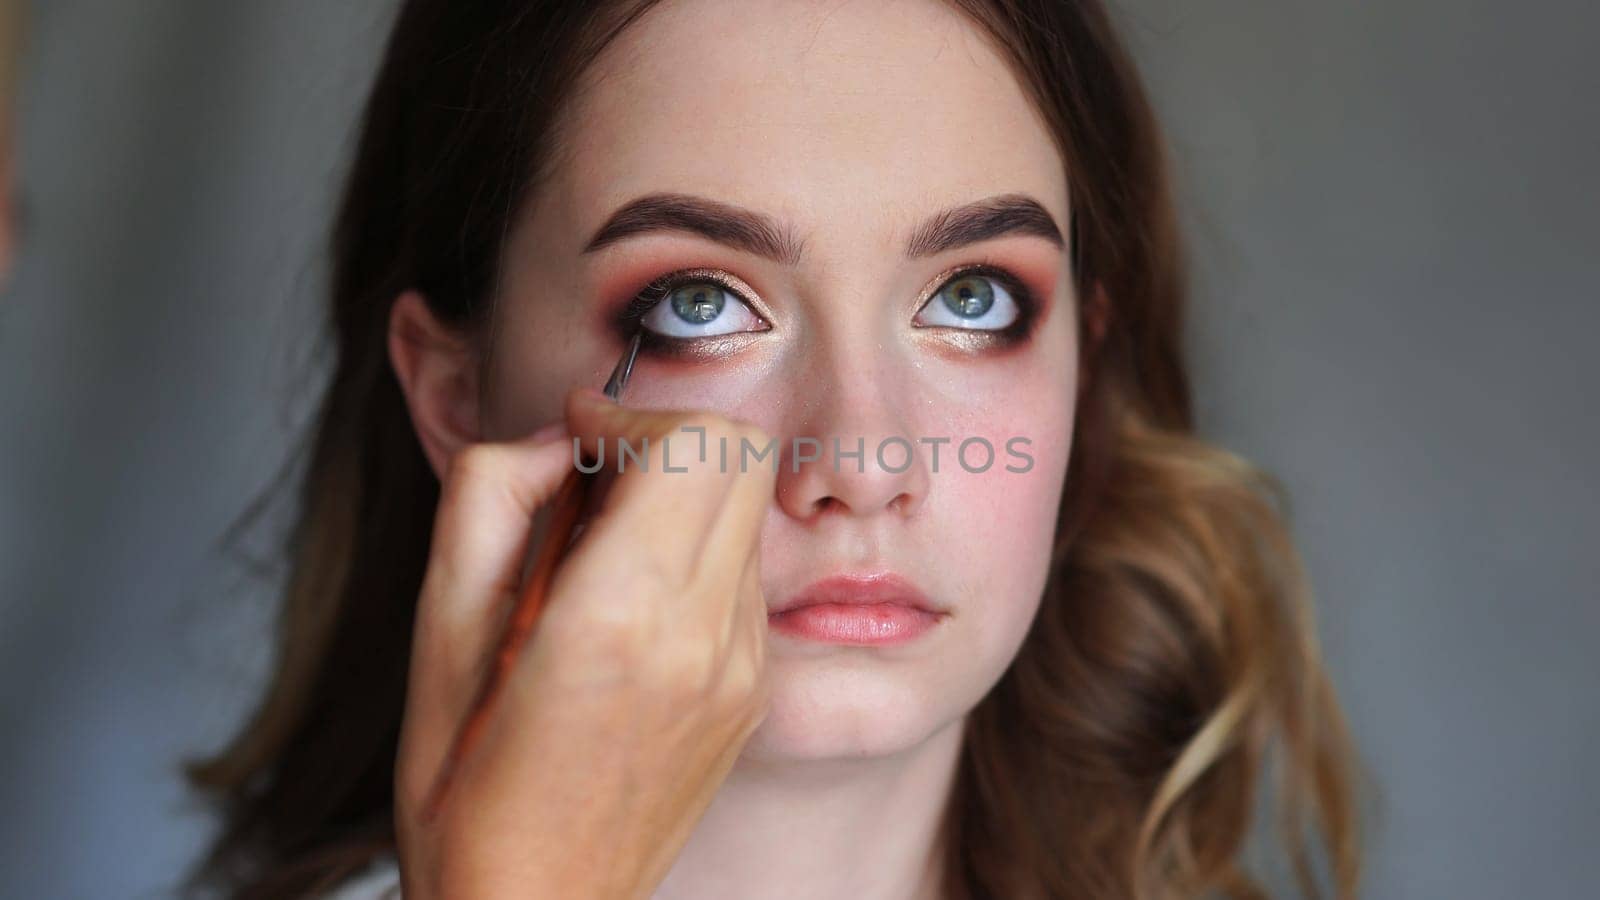 Girl makeup artist paints the eyes of a young girl by DovidPro